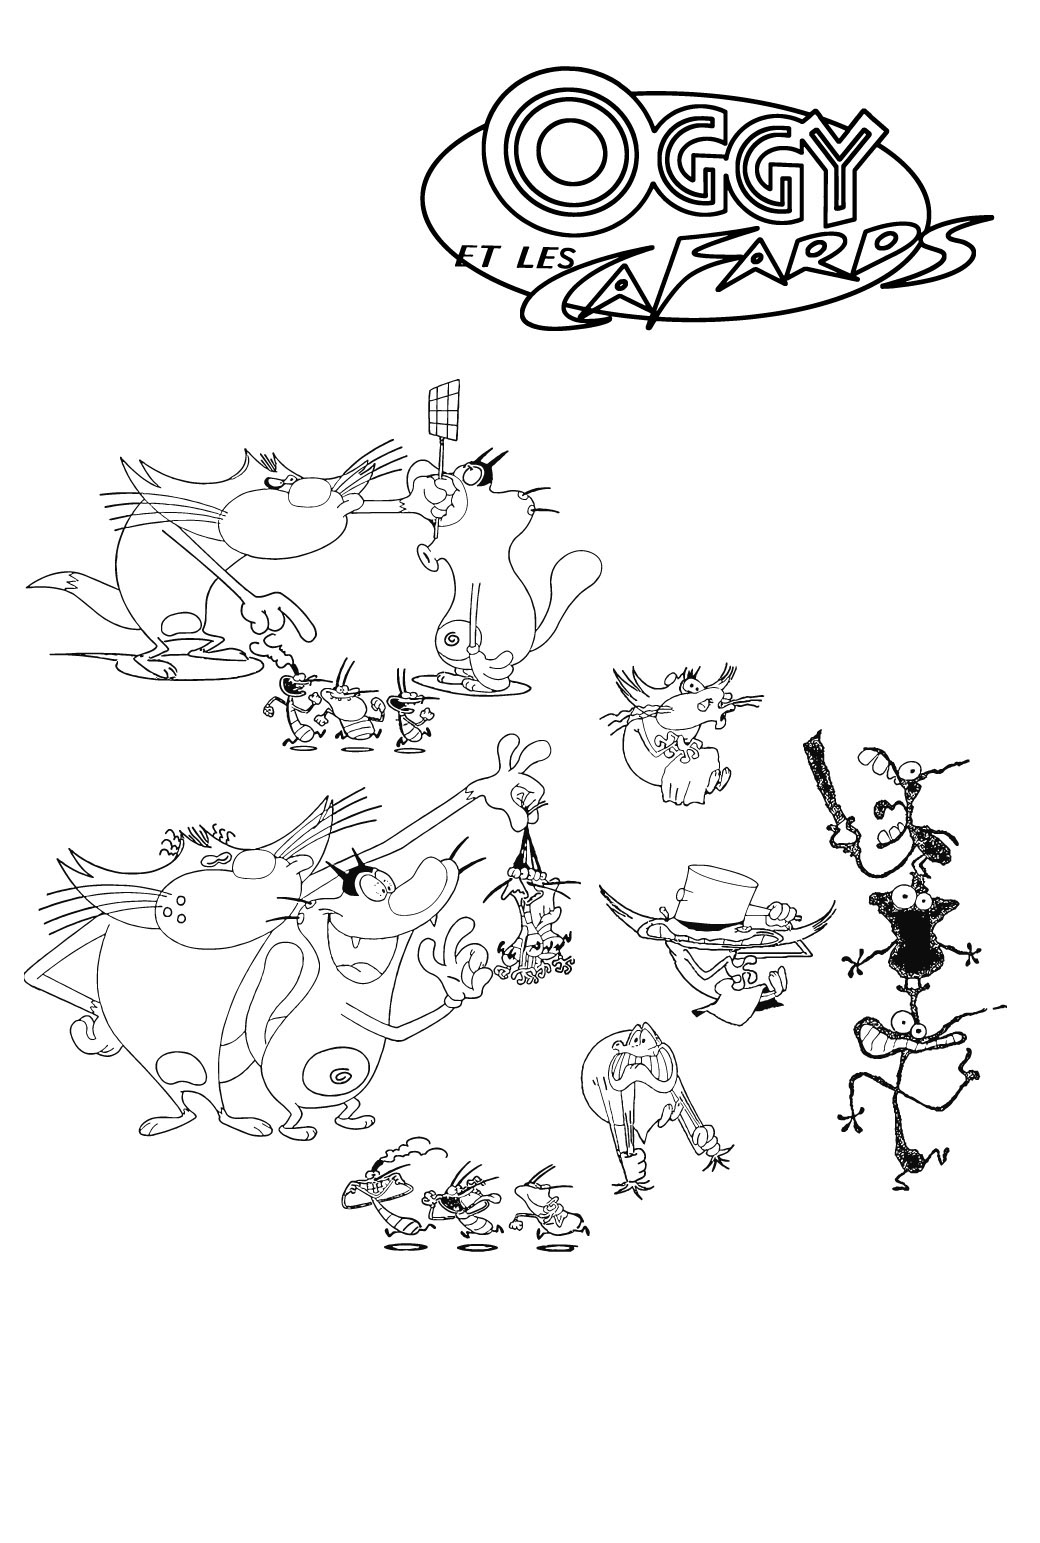 Oggy And The Cockroaches coloring page to download